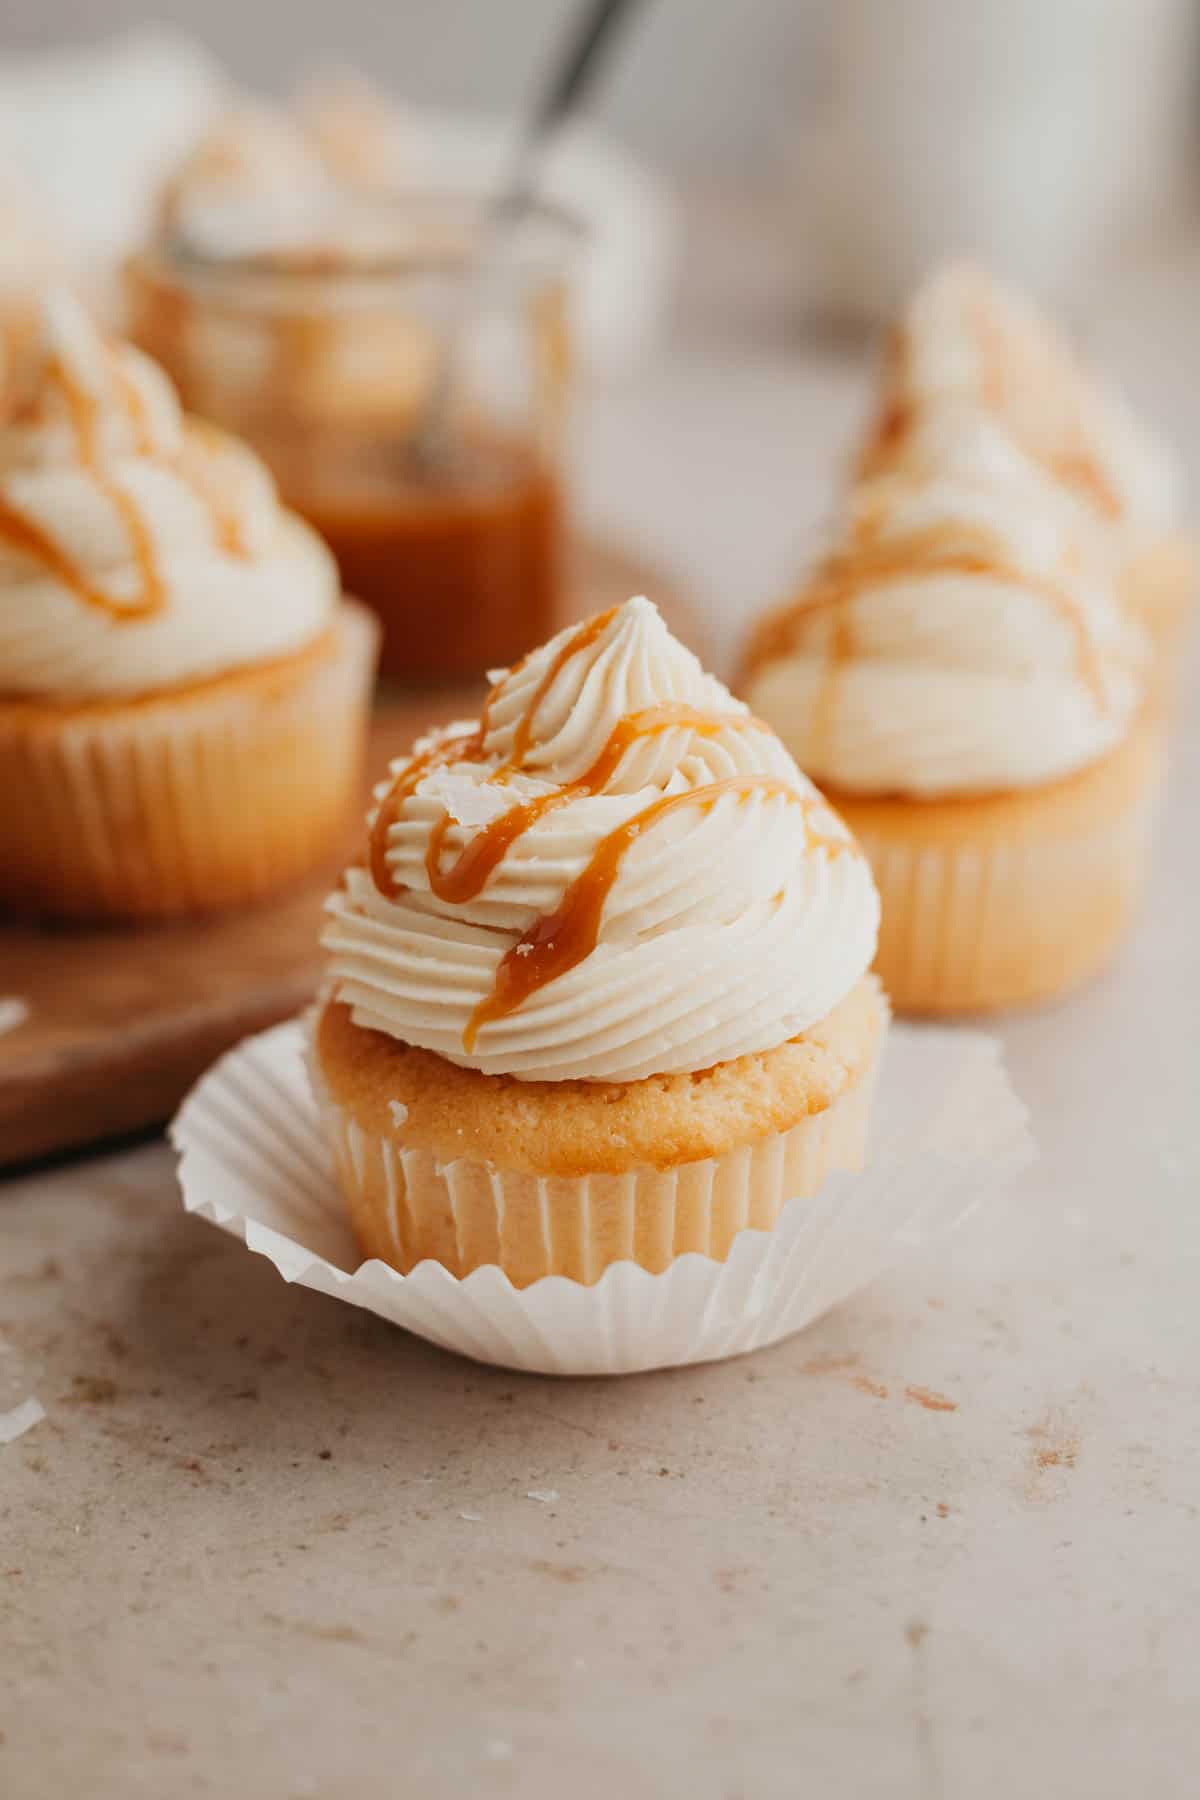 A caramel cupcake in a white paper liner, topped with buttercream and drizzled with caramel.